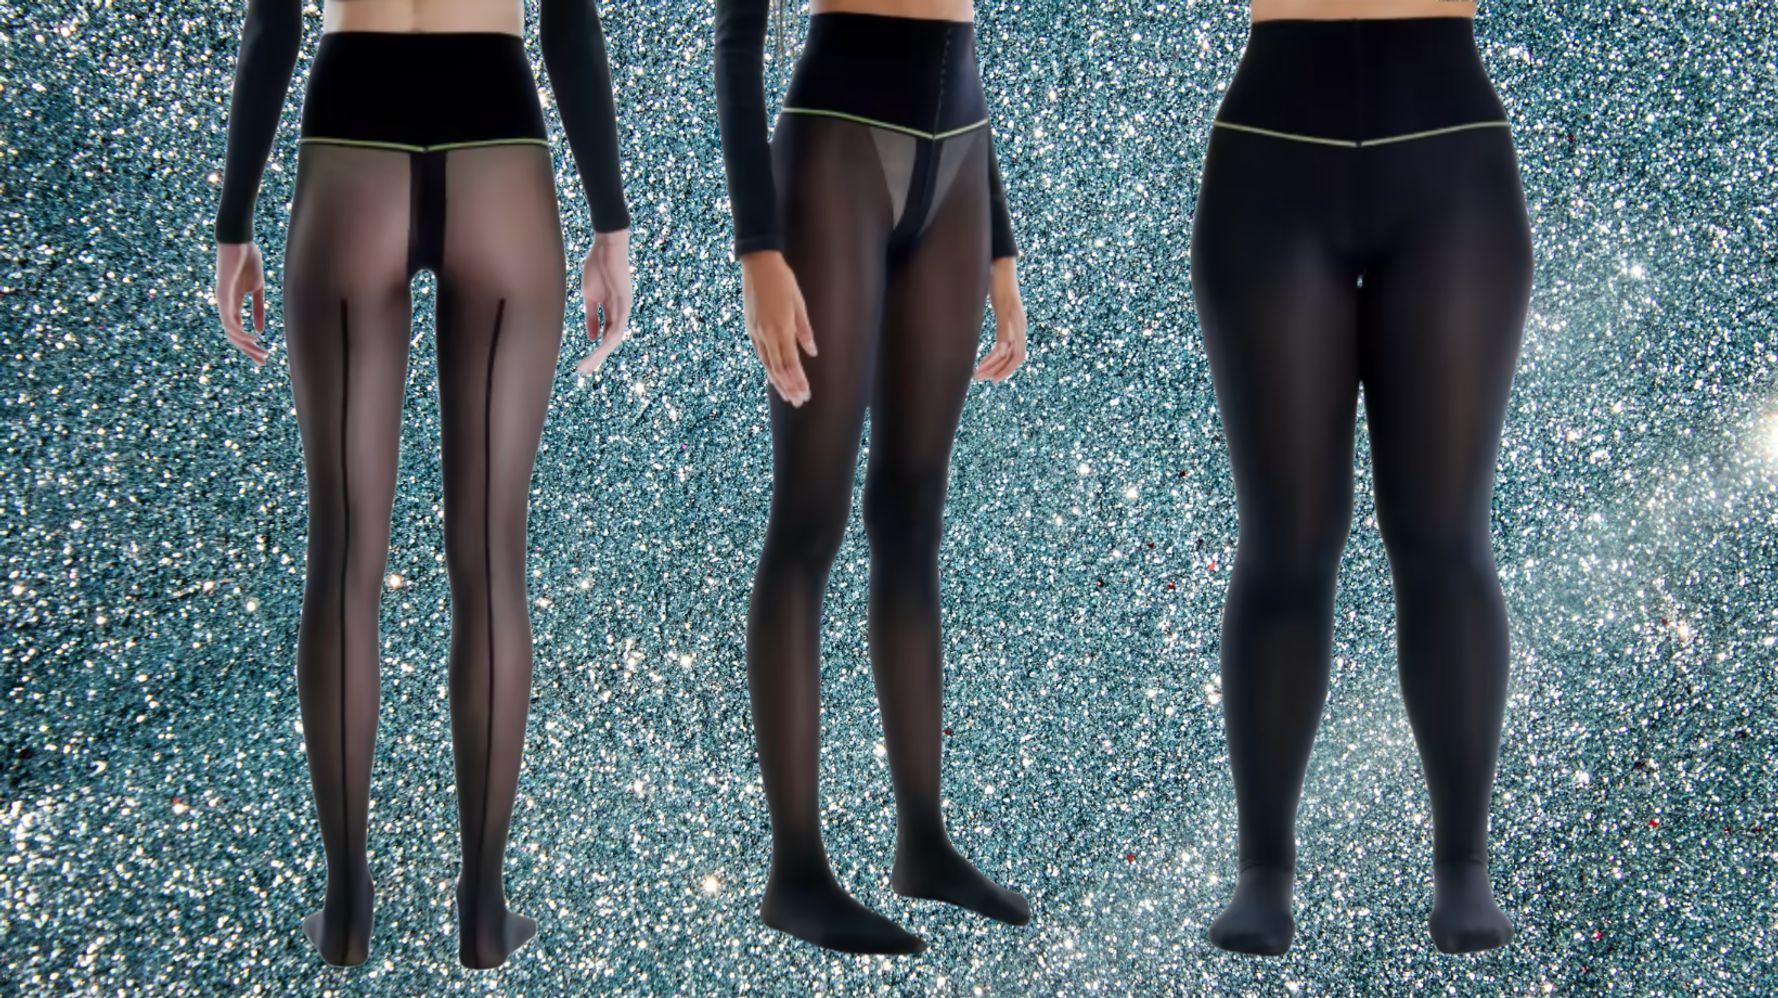 Has anyone brought in leggings for being sheer? I purchased these